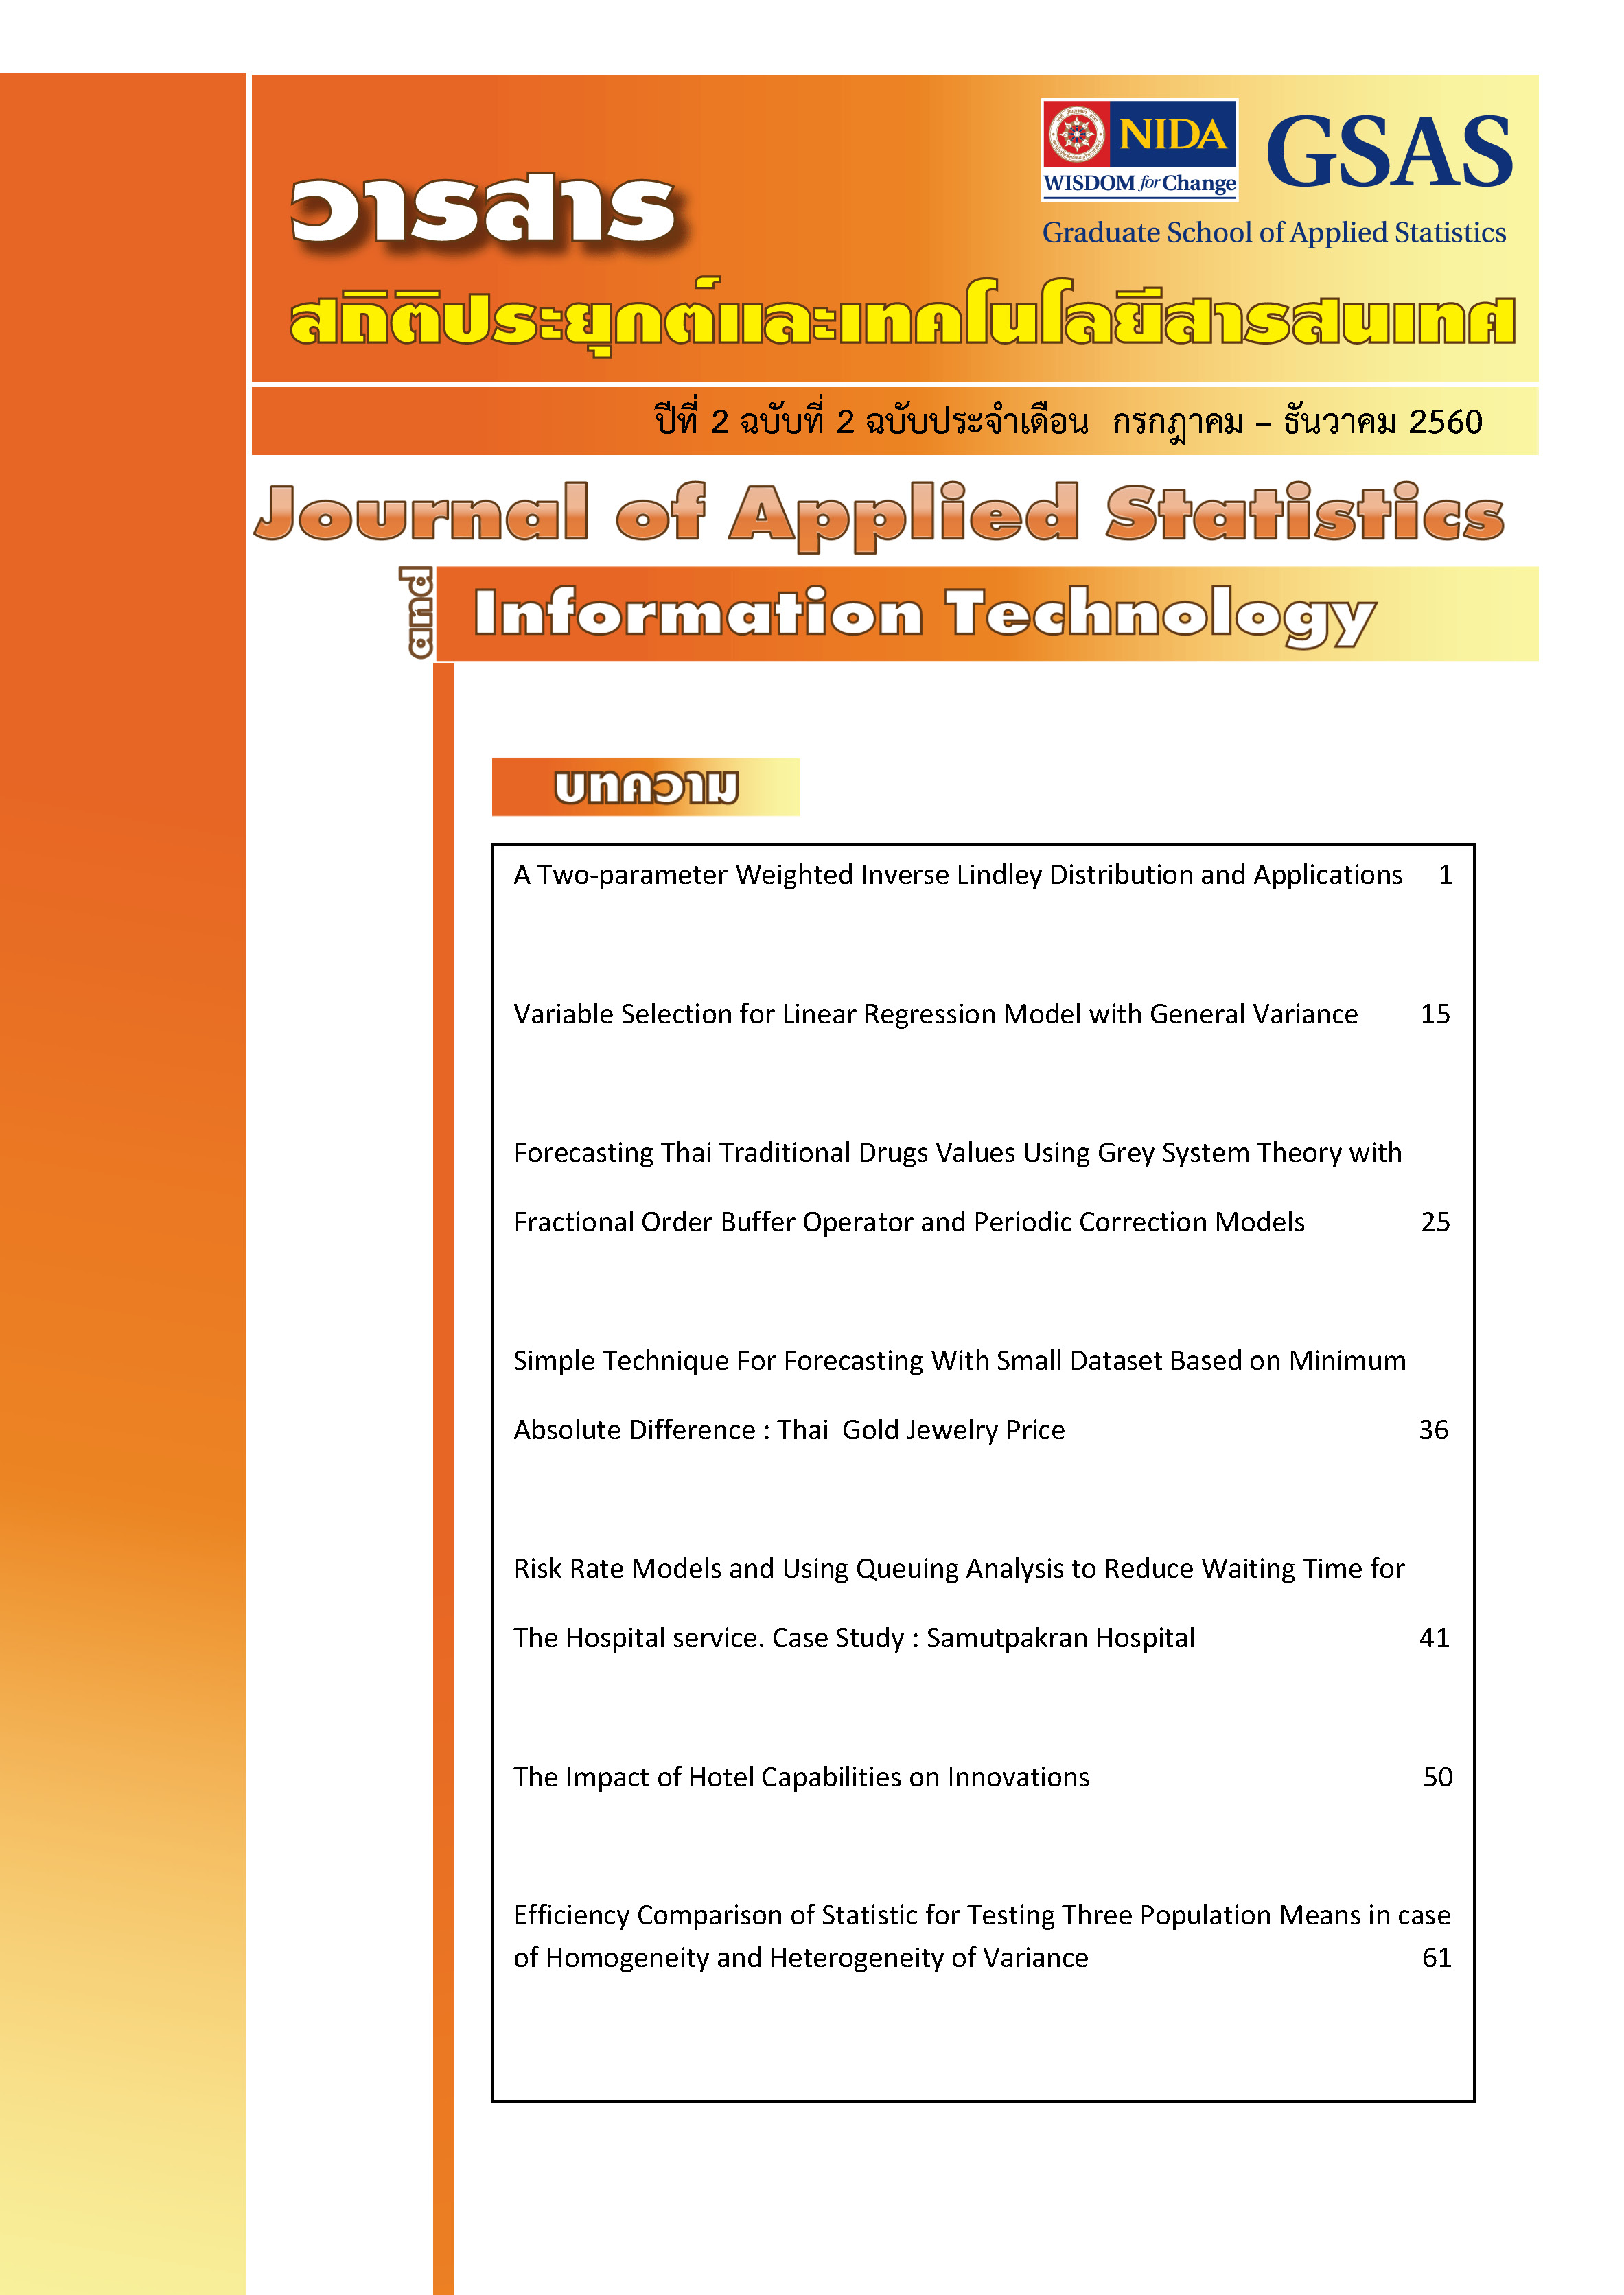 					View Vol. 2 No. 2 (2017): Journal of Applied Statistics and Information Technology Vol 2 No 2 (July - December 2017)
				